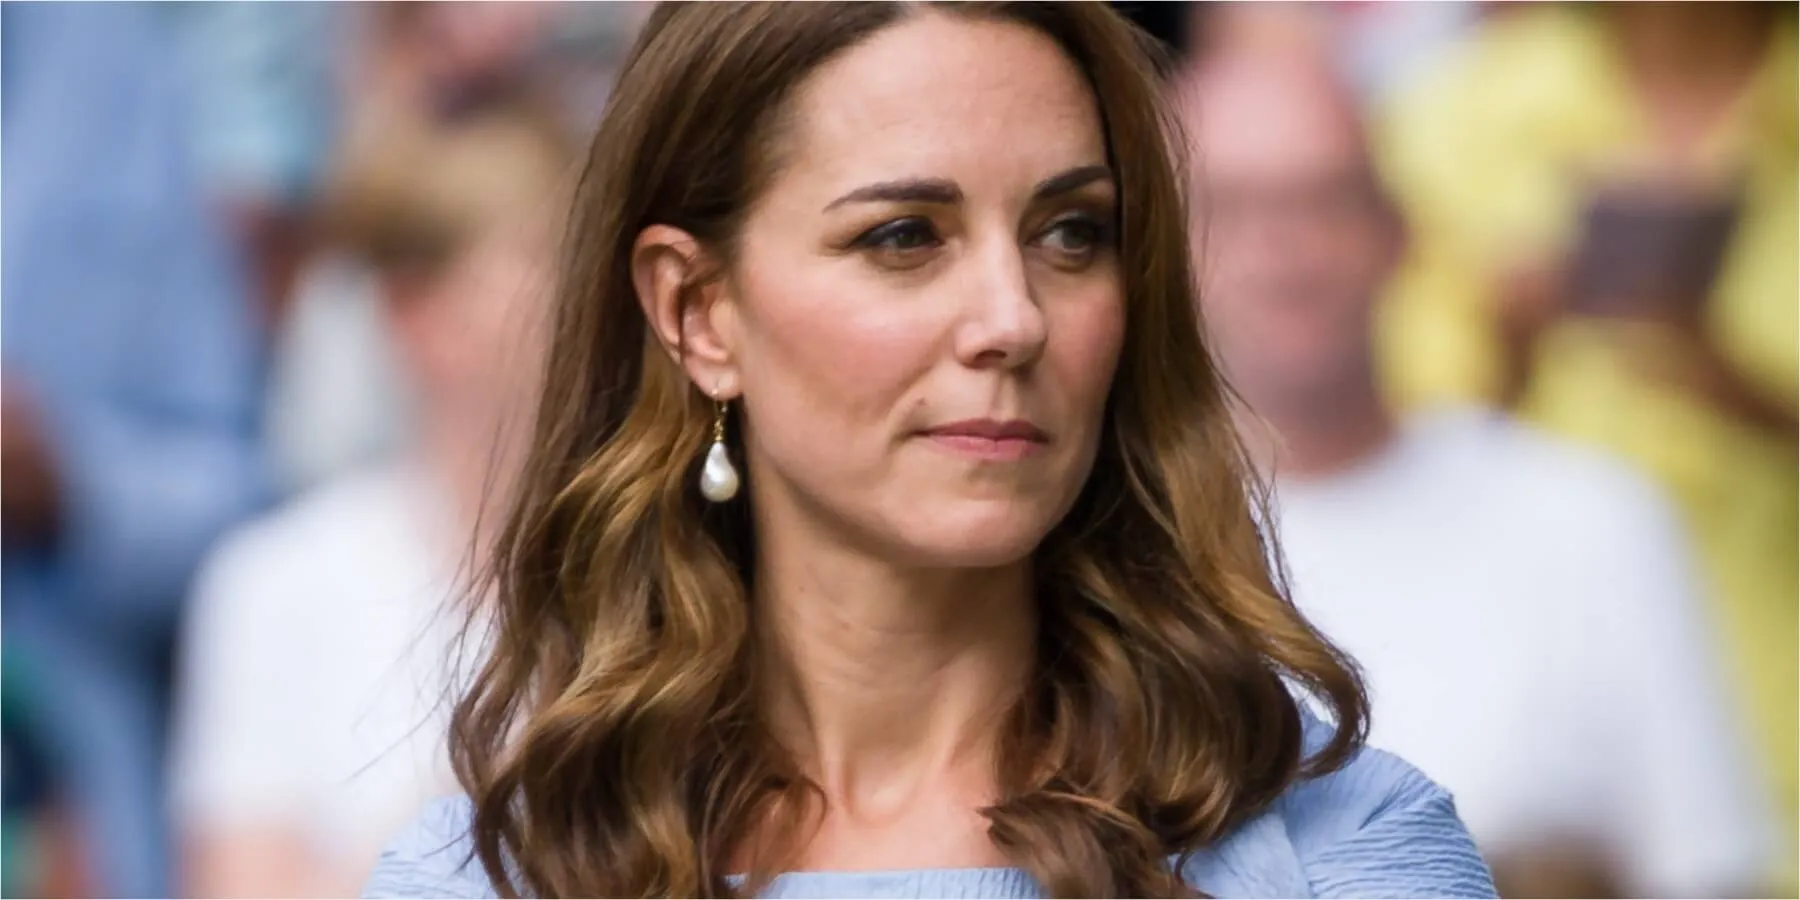 Kate Middleton remains out of the public eye after a cancer diagnosis